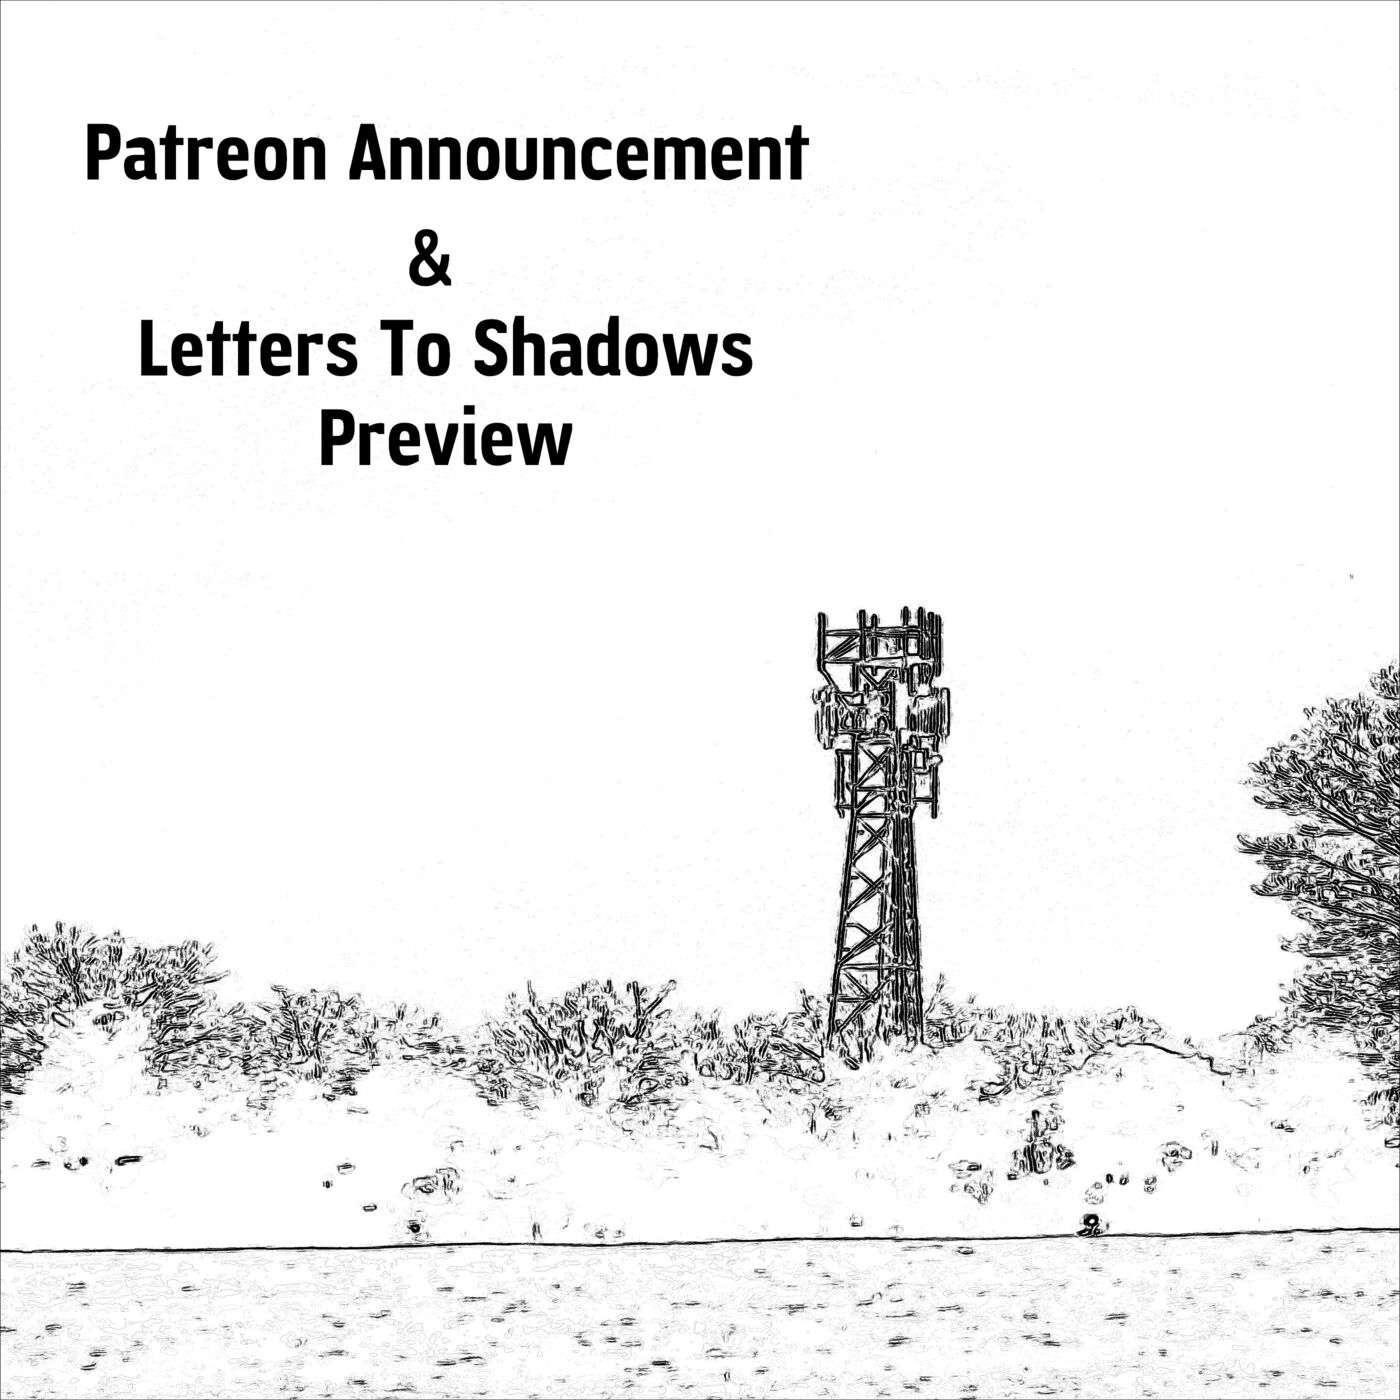 Patreon Announcement & Letters To Shadows Preview